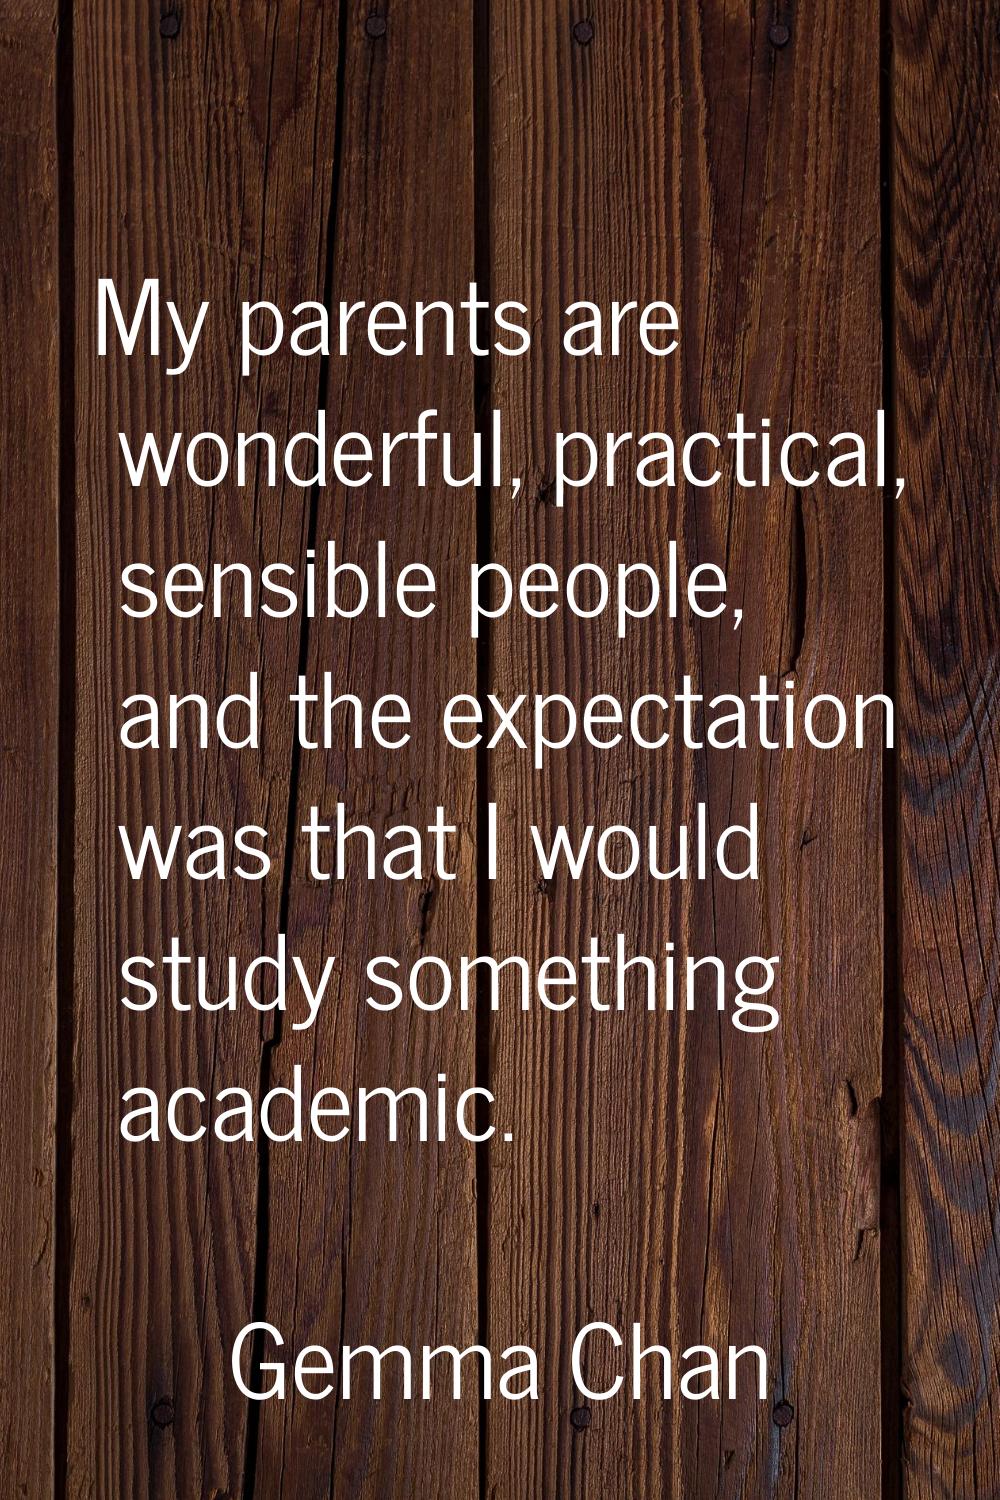 My parents are wonderful, practical, sensible people, and the expectation was that I would study so